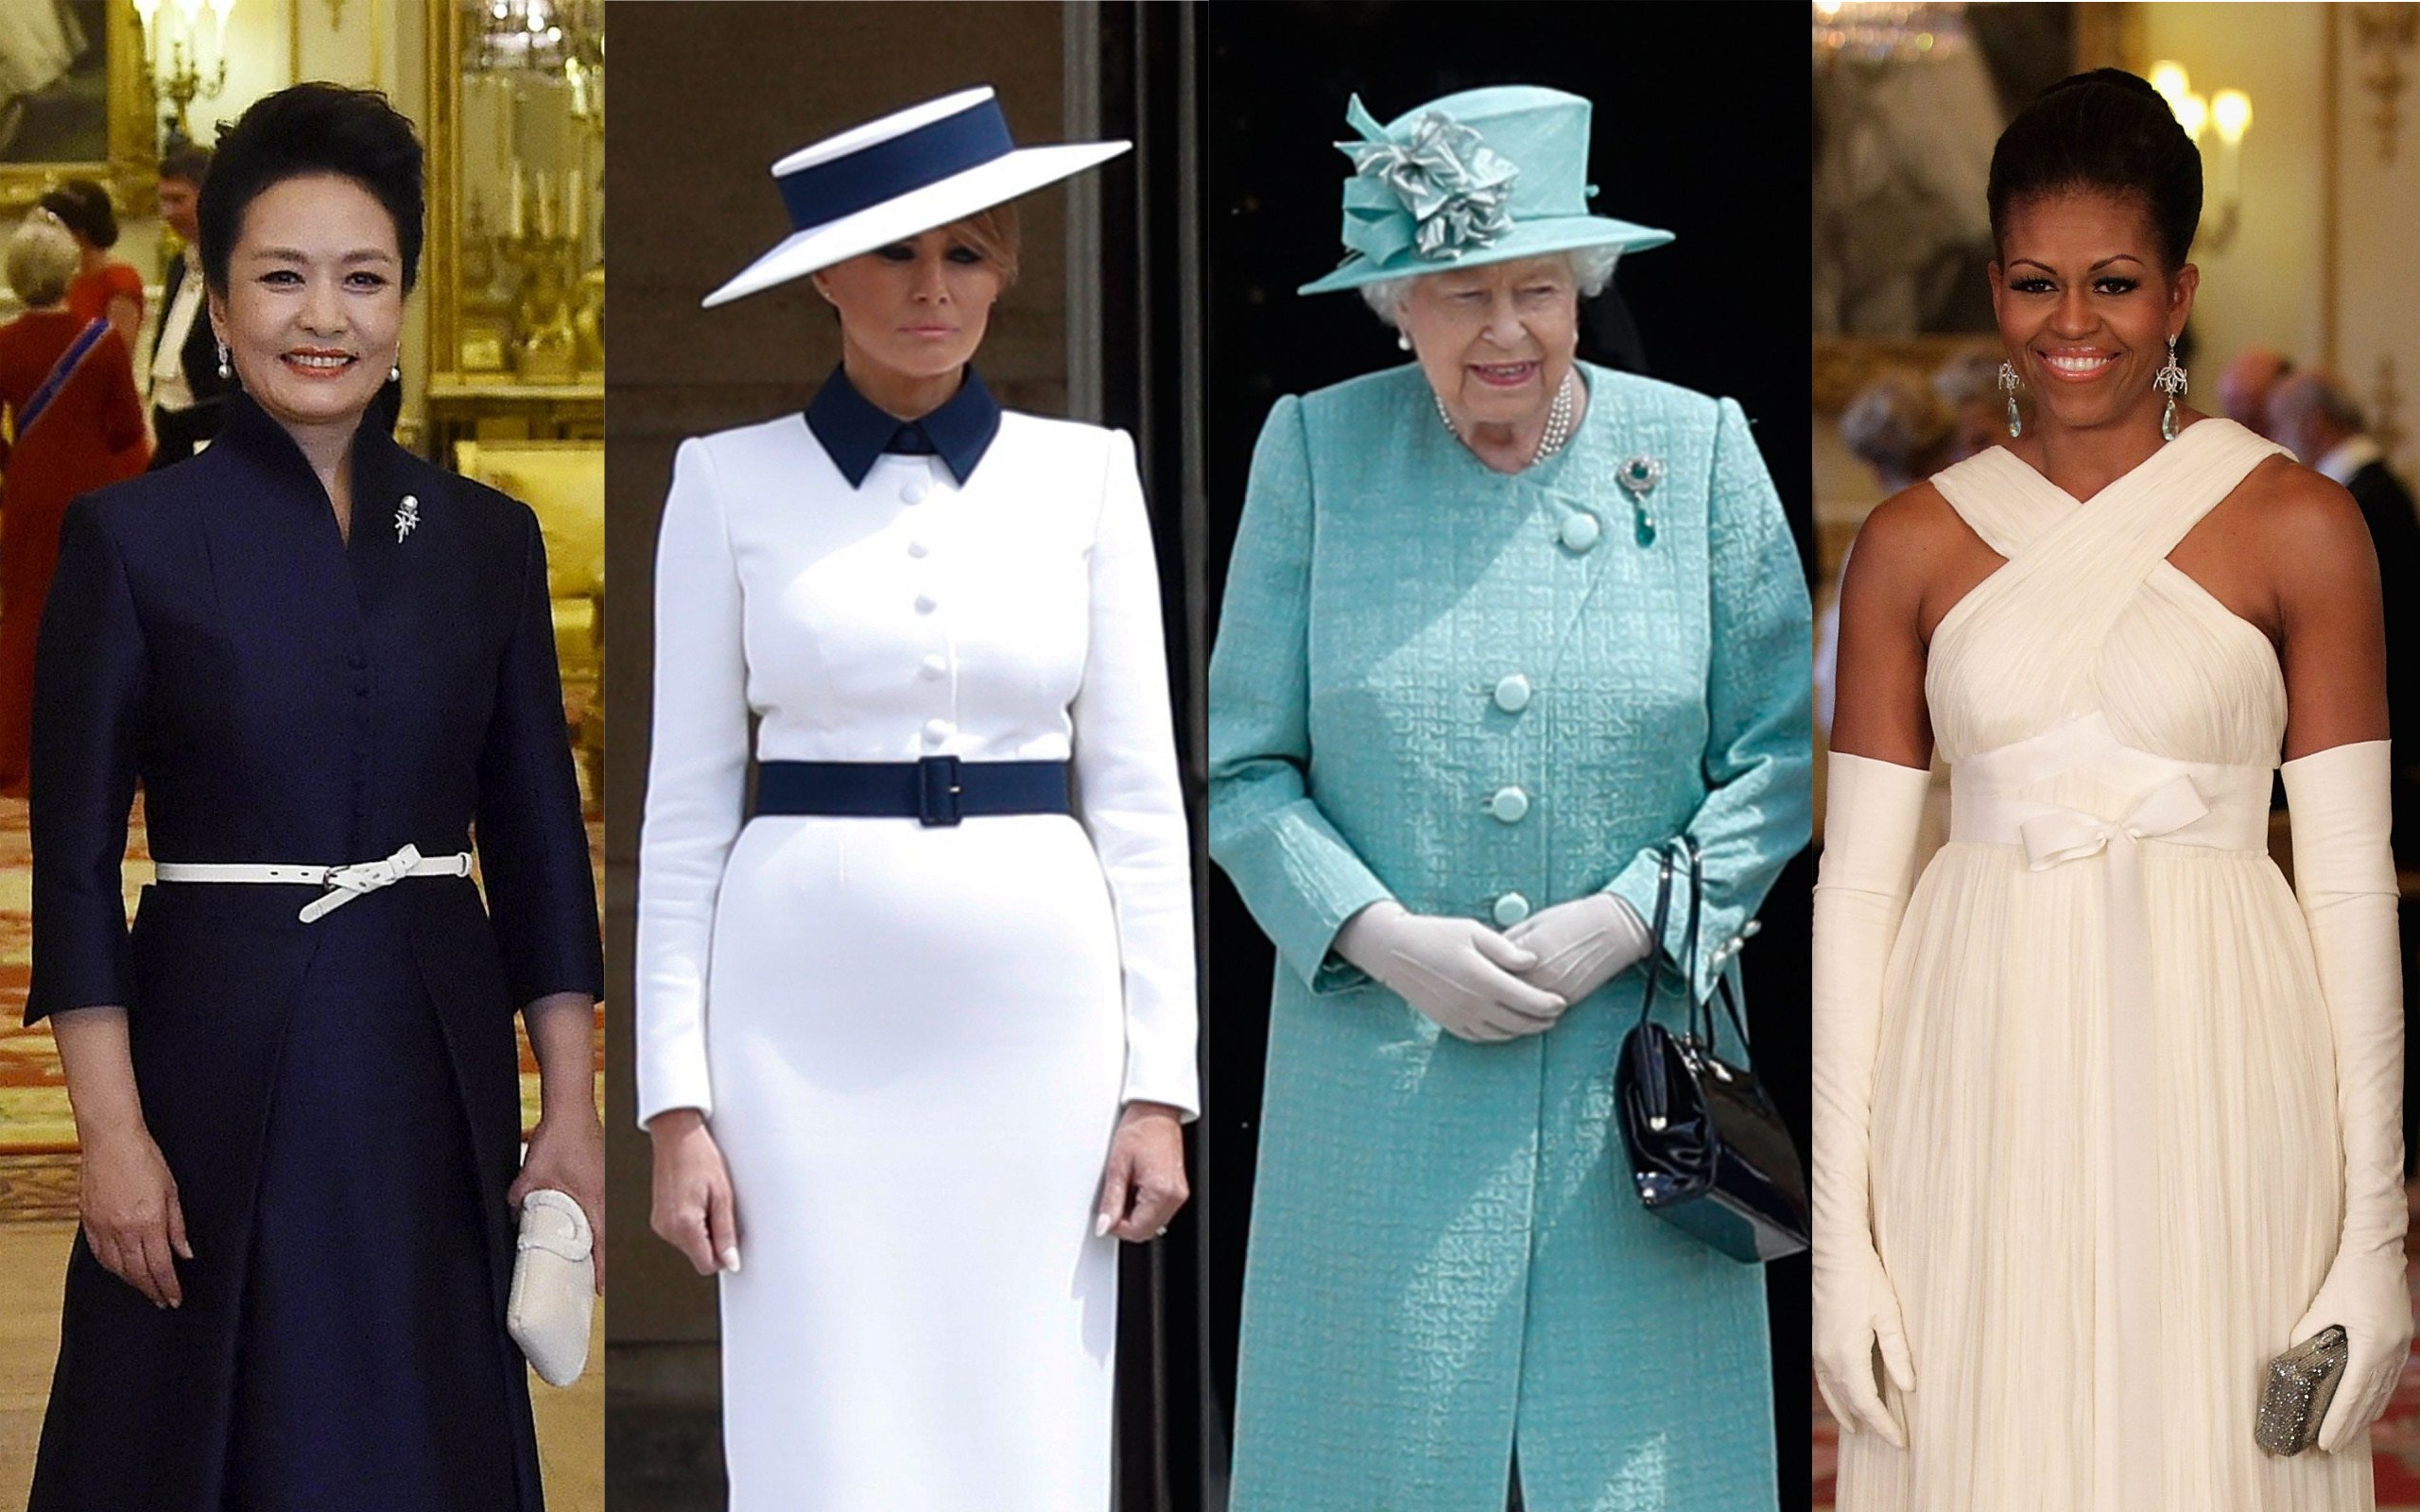 China’s First Lady Peng Liyuan, Melania Trump and Michelle Obama show off the looks they wore to meet Queen Elizabeth at official engagements. Photo: AFP